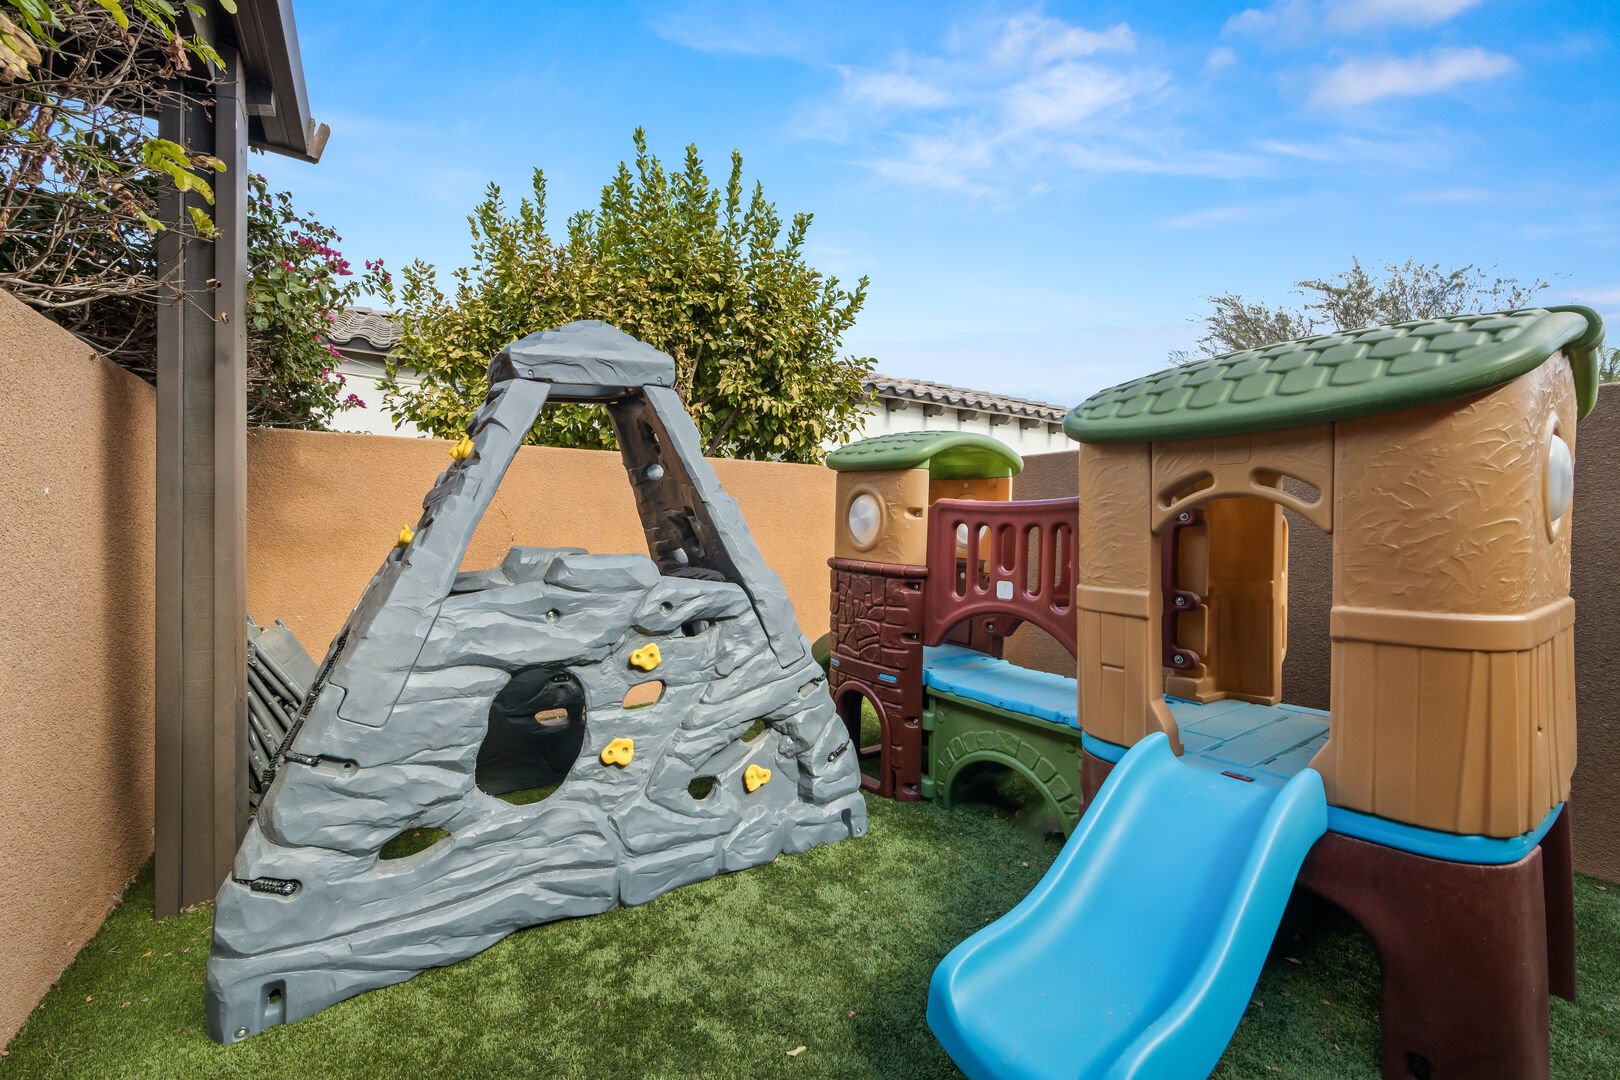 Hard Roq even has a special spot for the kiddos. This play area is completely separate and gated with turf and play sets.